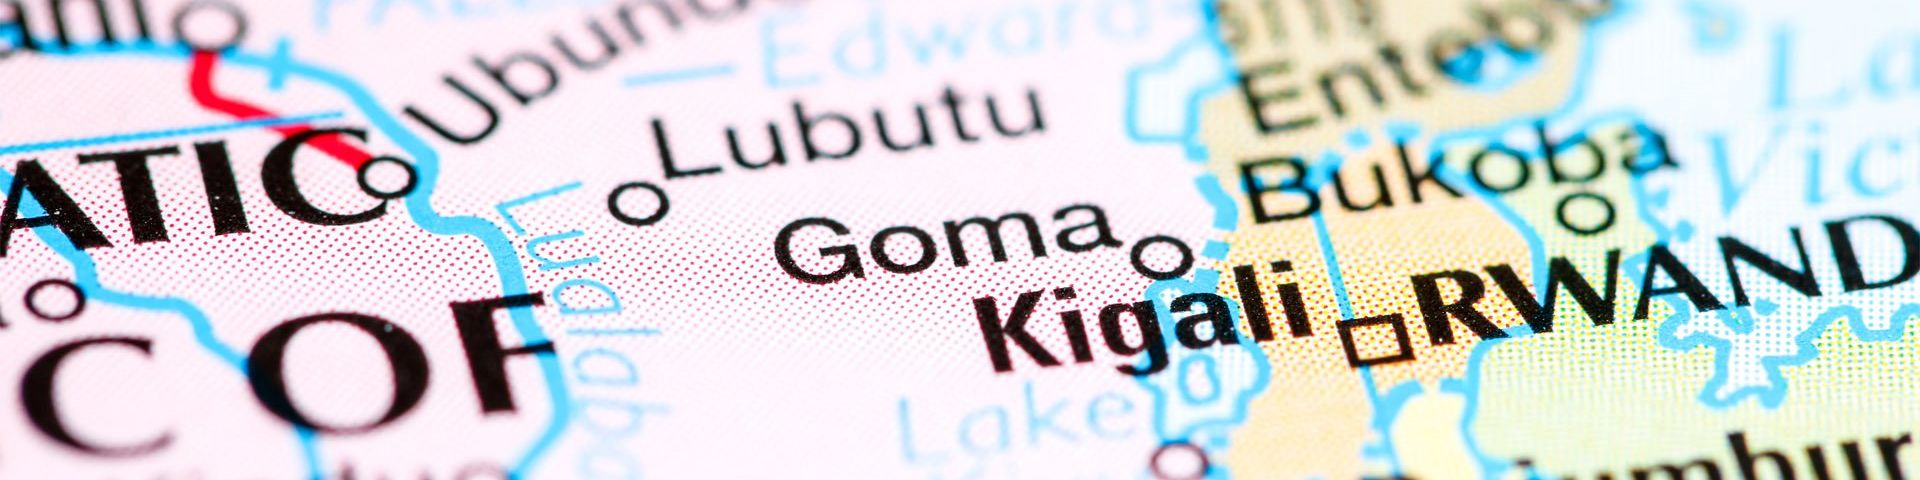 A close up of a map of the Democratic Republic of the Congo, focusing on the regions of Goma, Kigali (in bold), Lubutu and Bukoba. The word RWANDA can be partially seen.